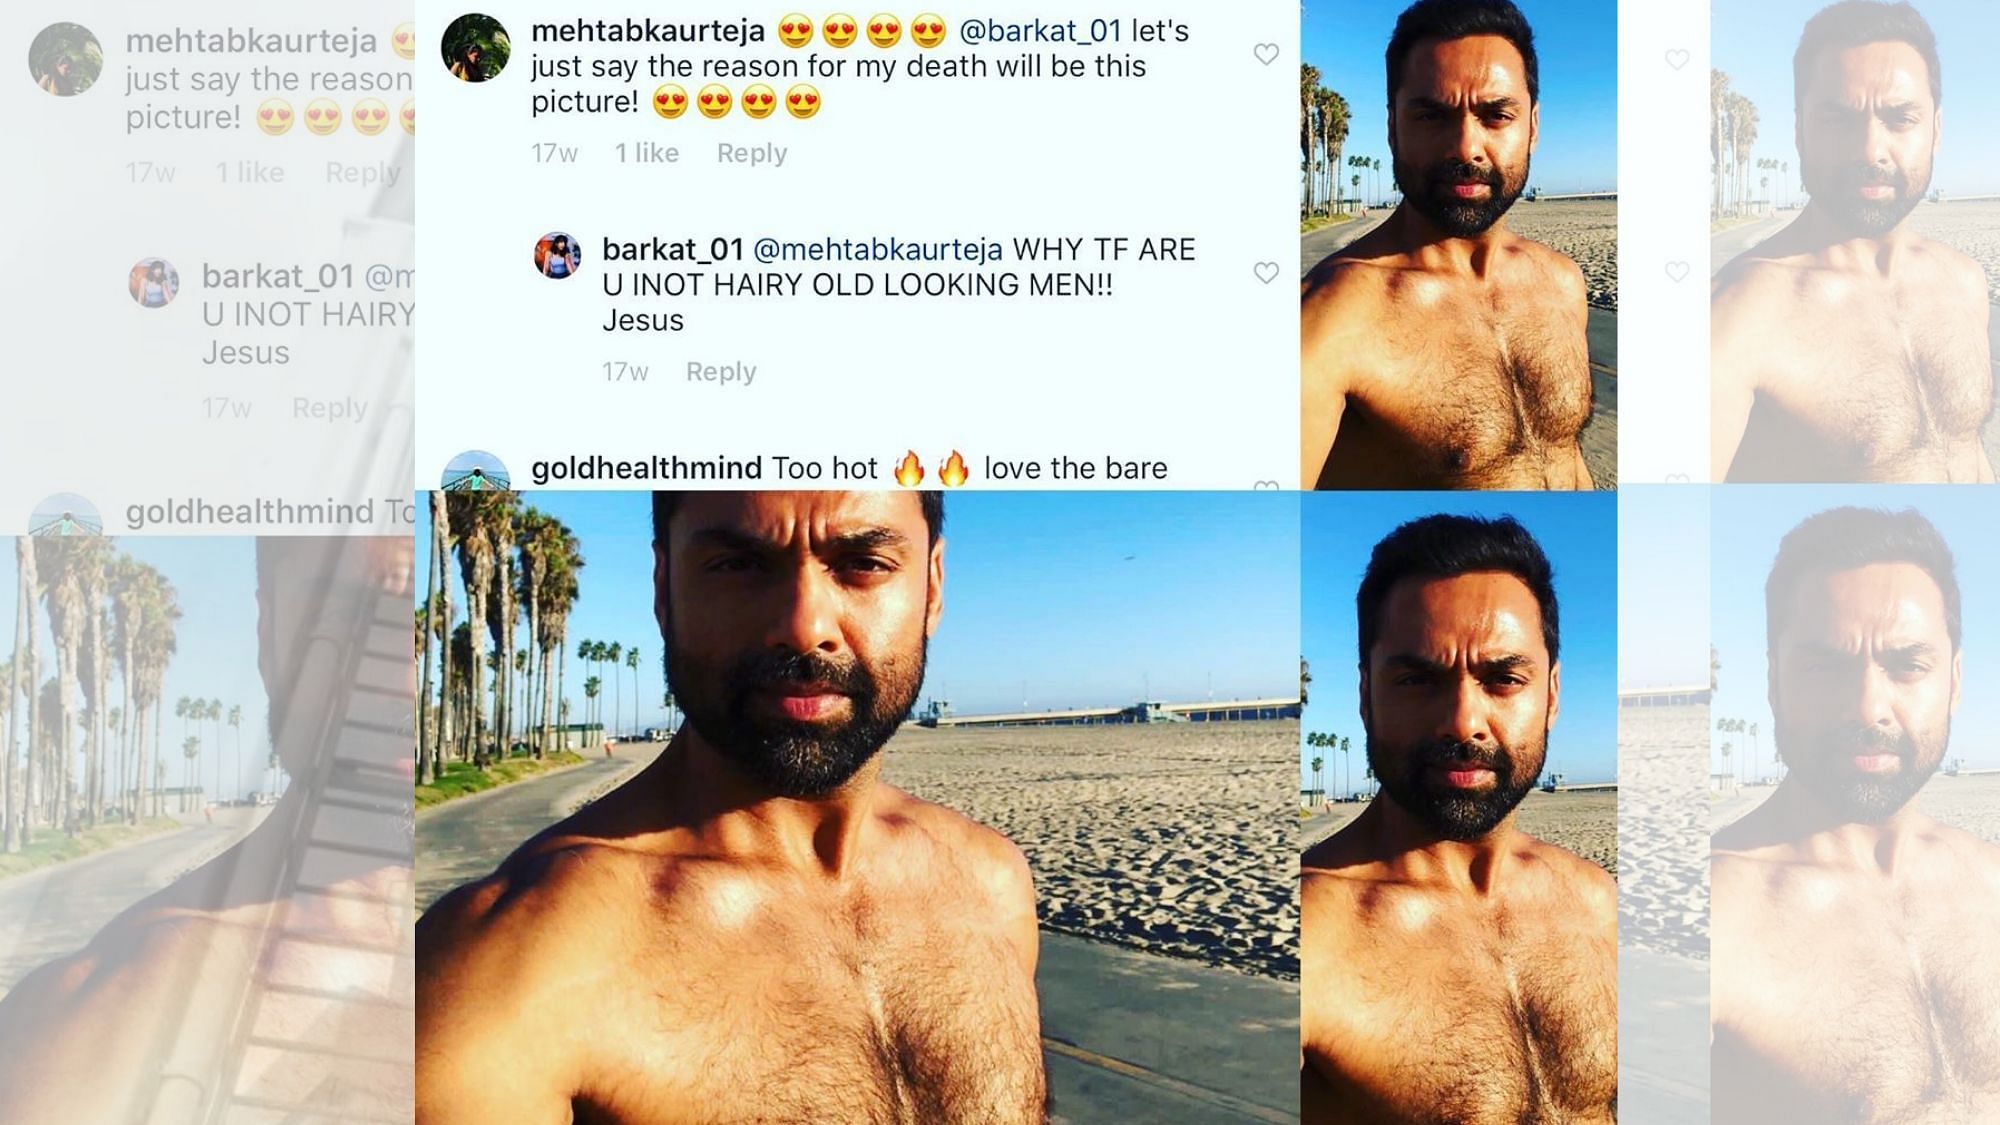 Abhay Deol posted a collage of his picture with the screenshot of the troll